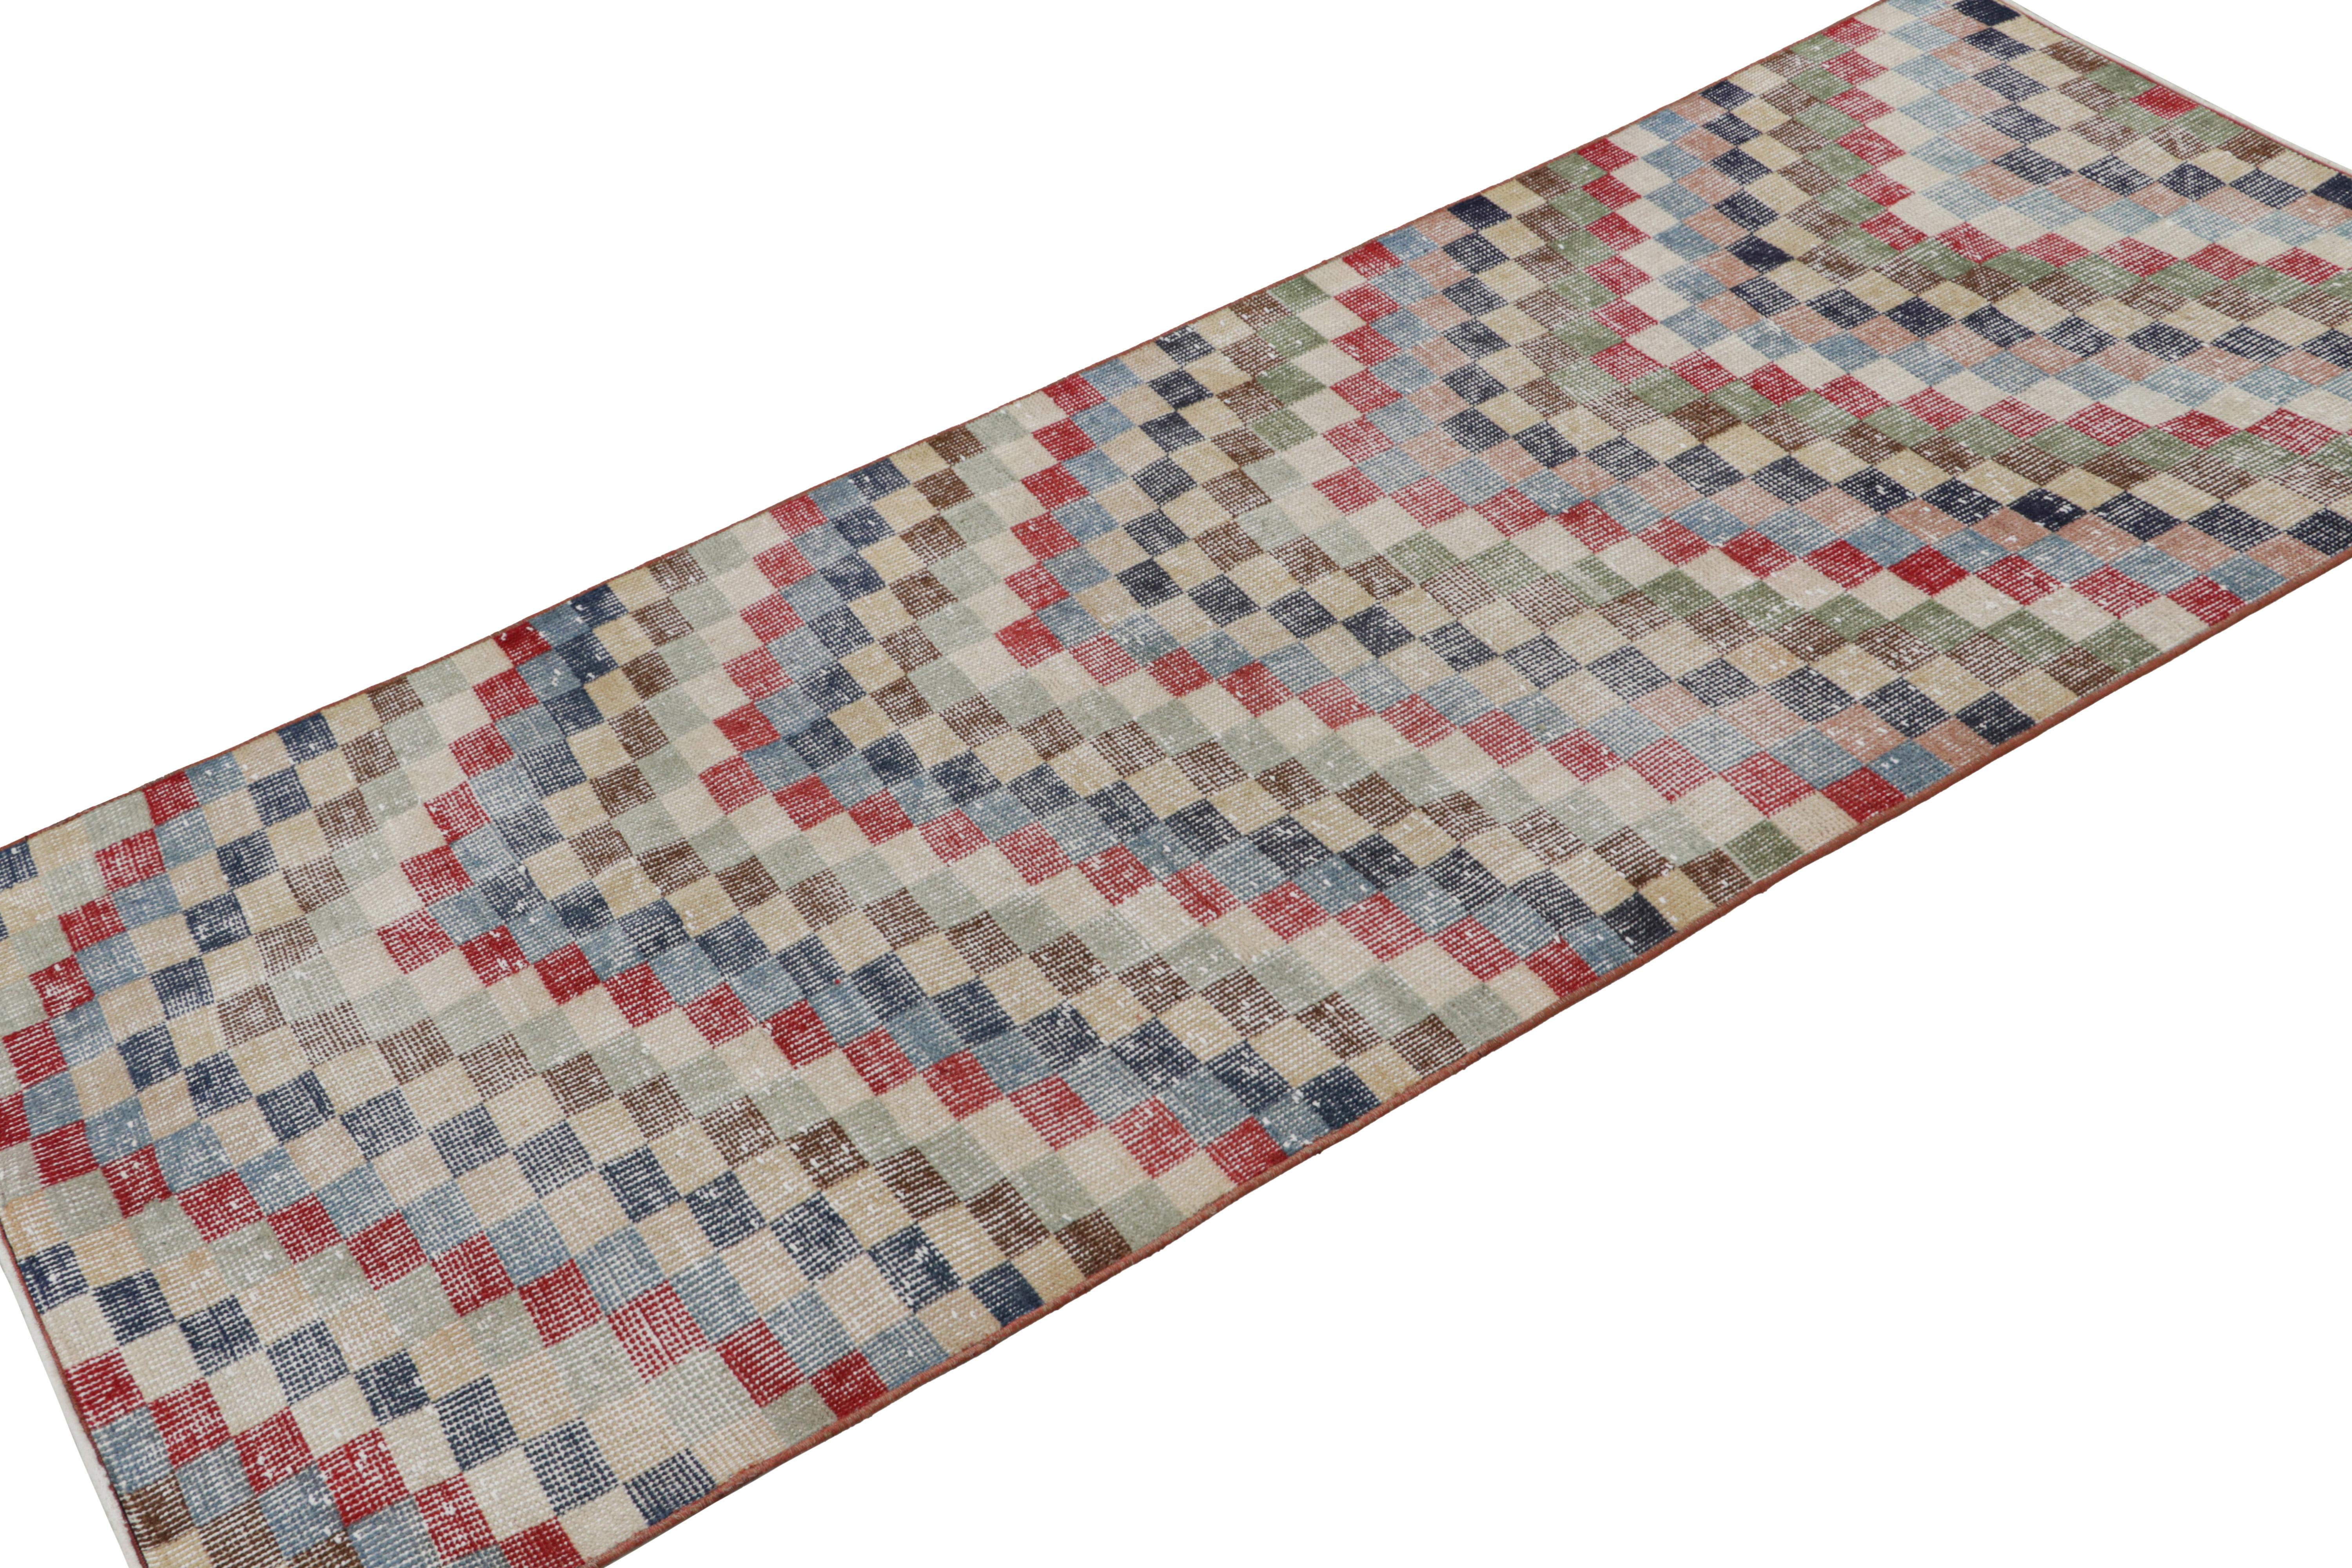 This vintage 3x7 Art Deco runner rug, hand-knotted in wool, circa 1960-1970, is a new addition to Rug & Kilim Collection. This line is a commemoration, with rare curations we believe to hail from multidisciplinary Turkish designer Zeki Müren. 

On